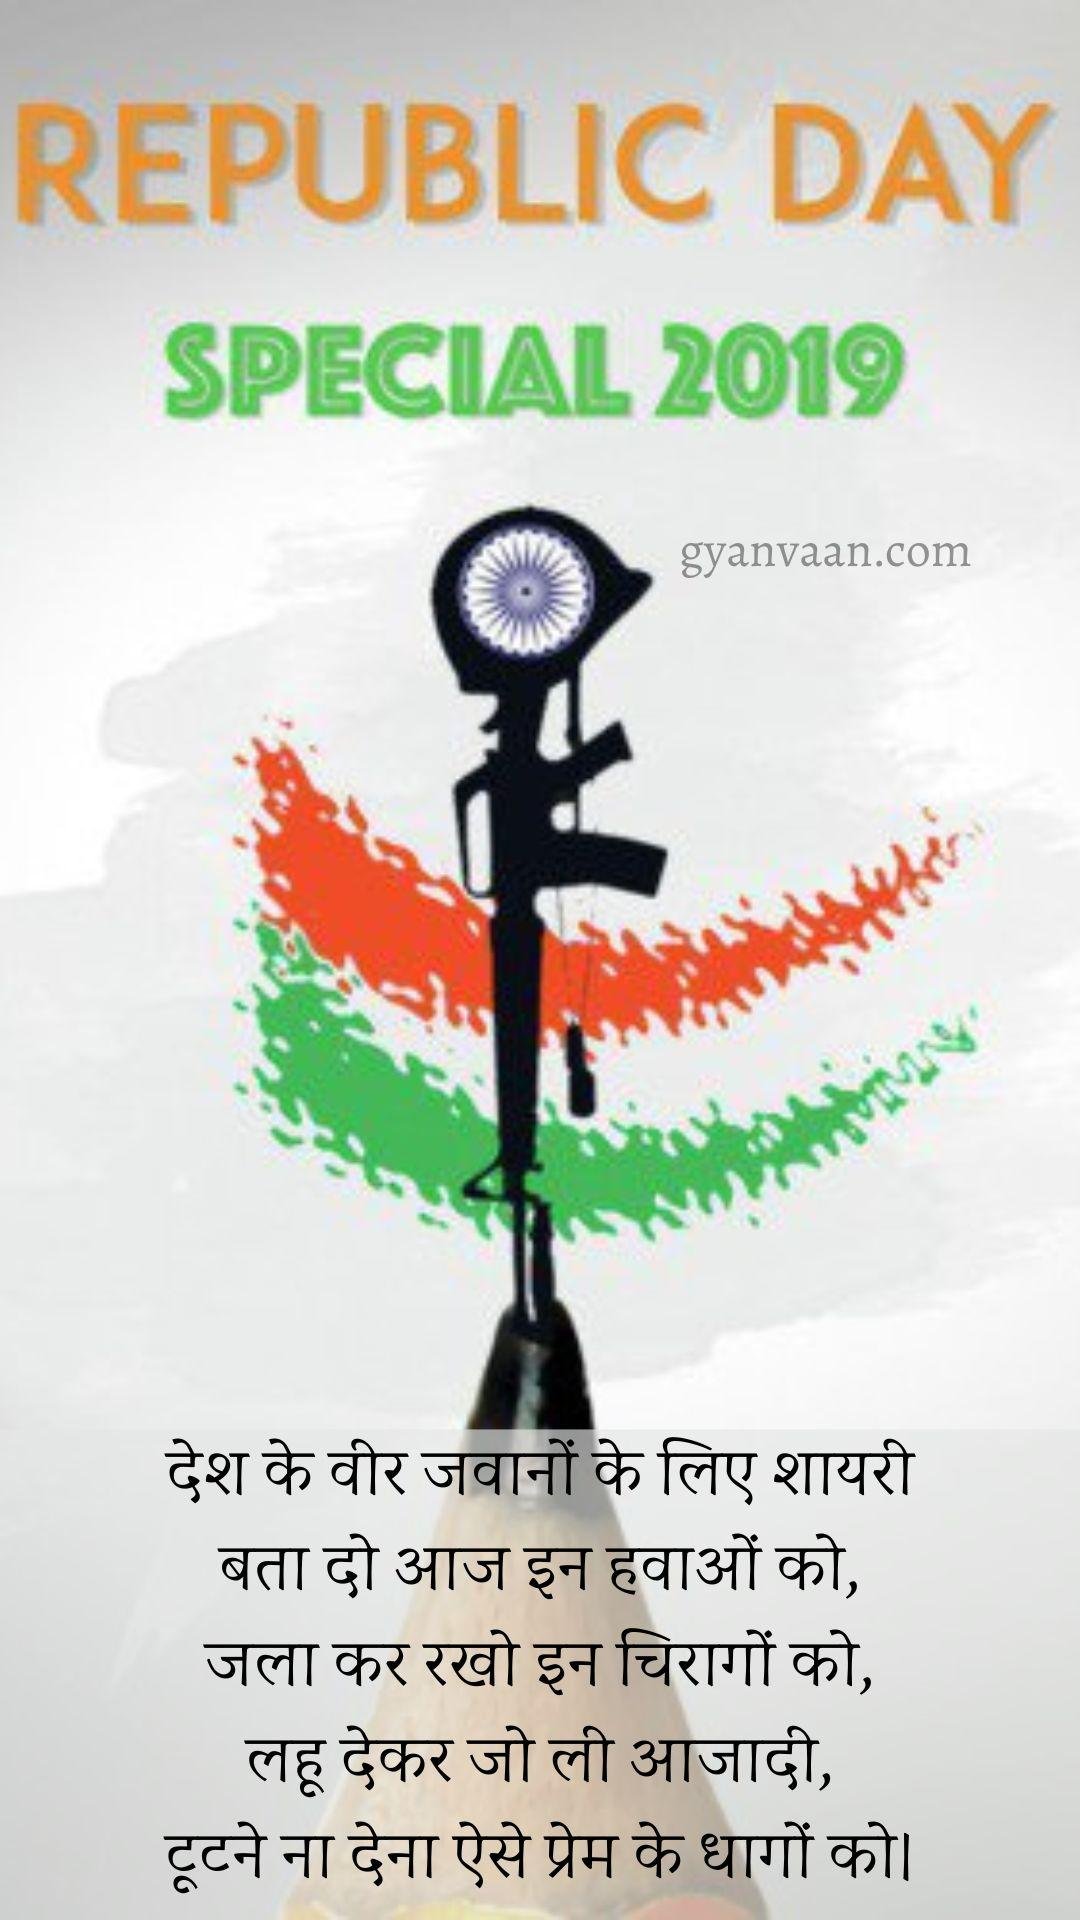 Republic Day Quotes In Hindi With Status And Shayari 4 - Republic Day Quotes In Hindi